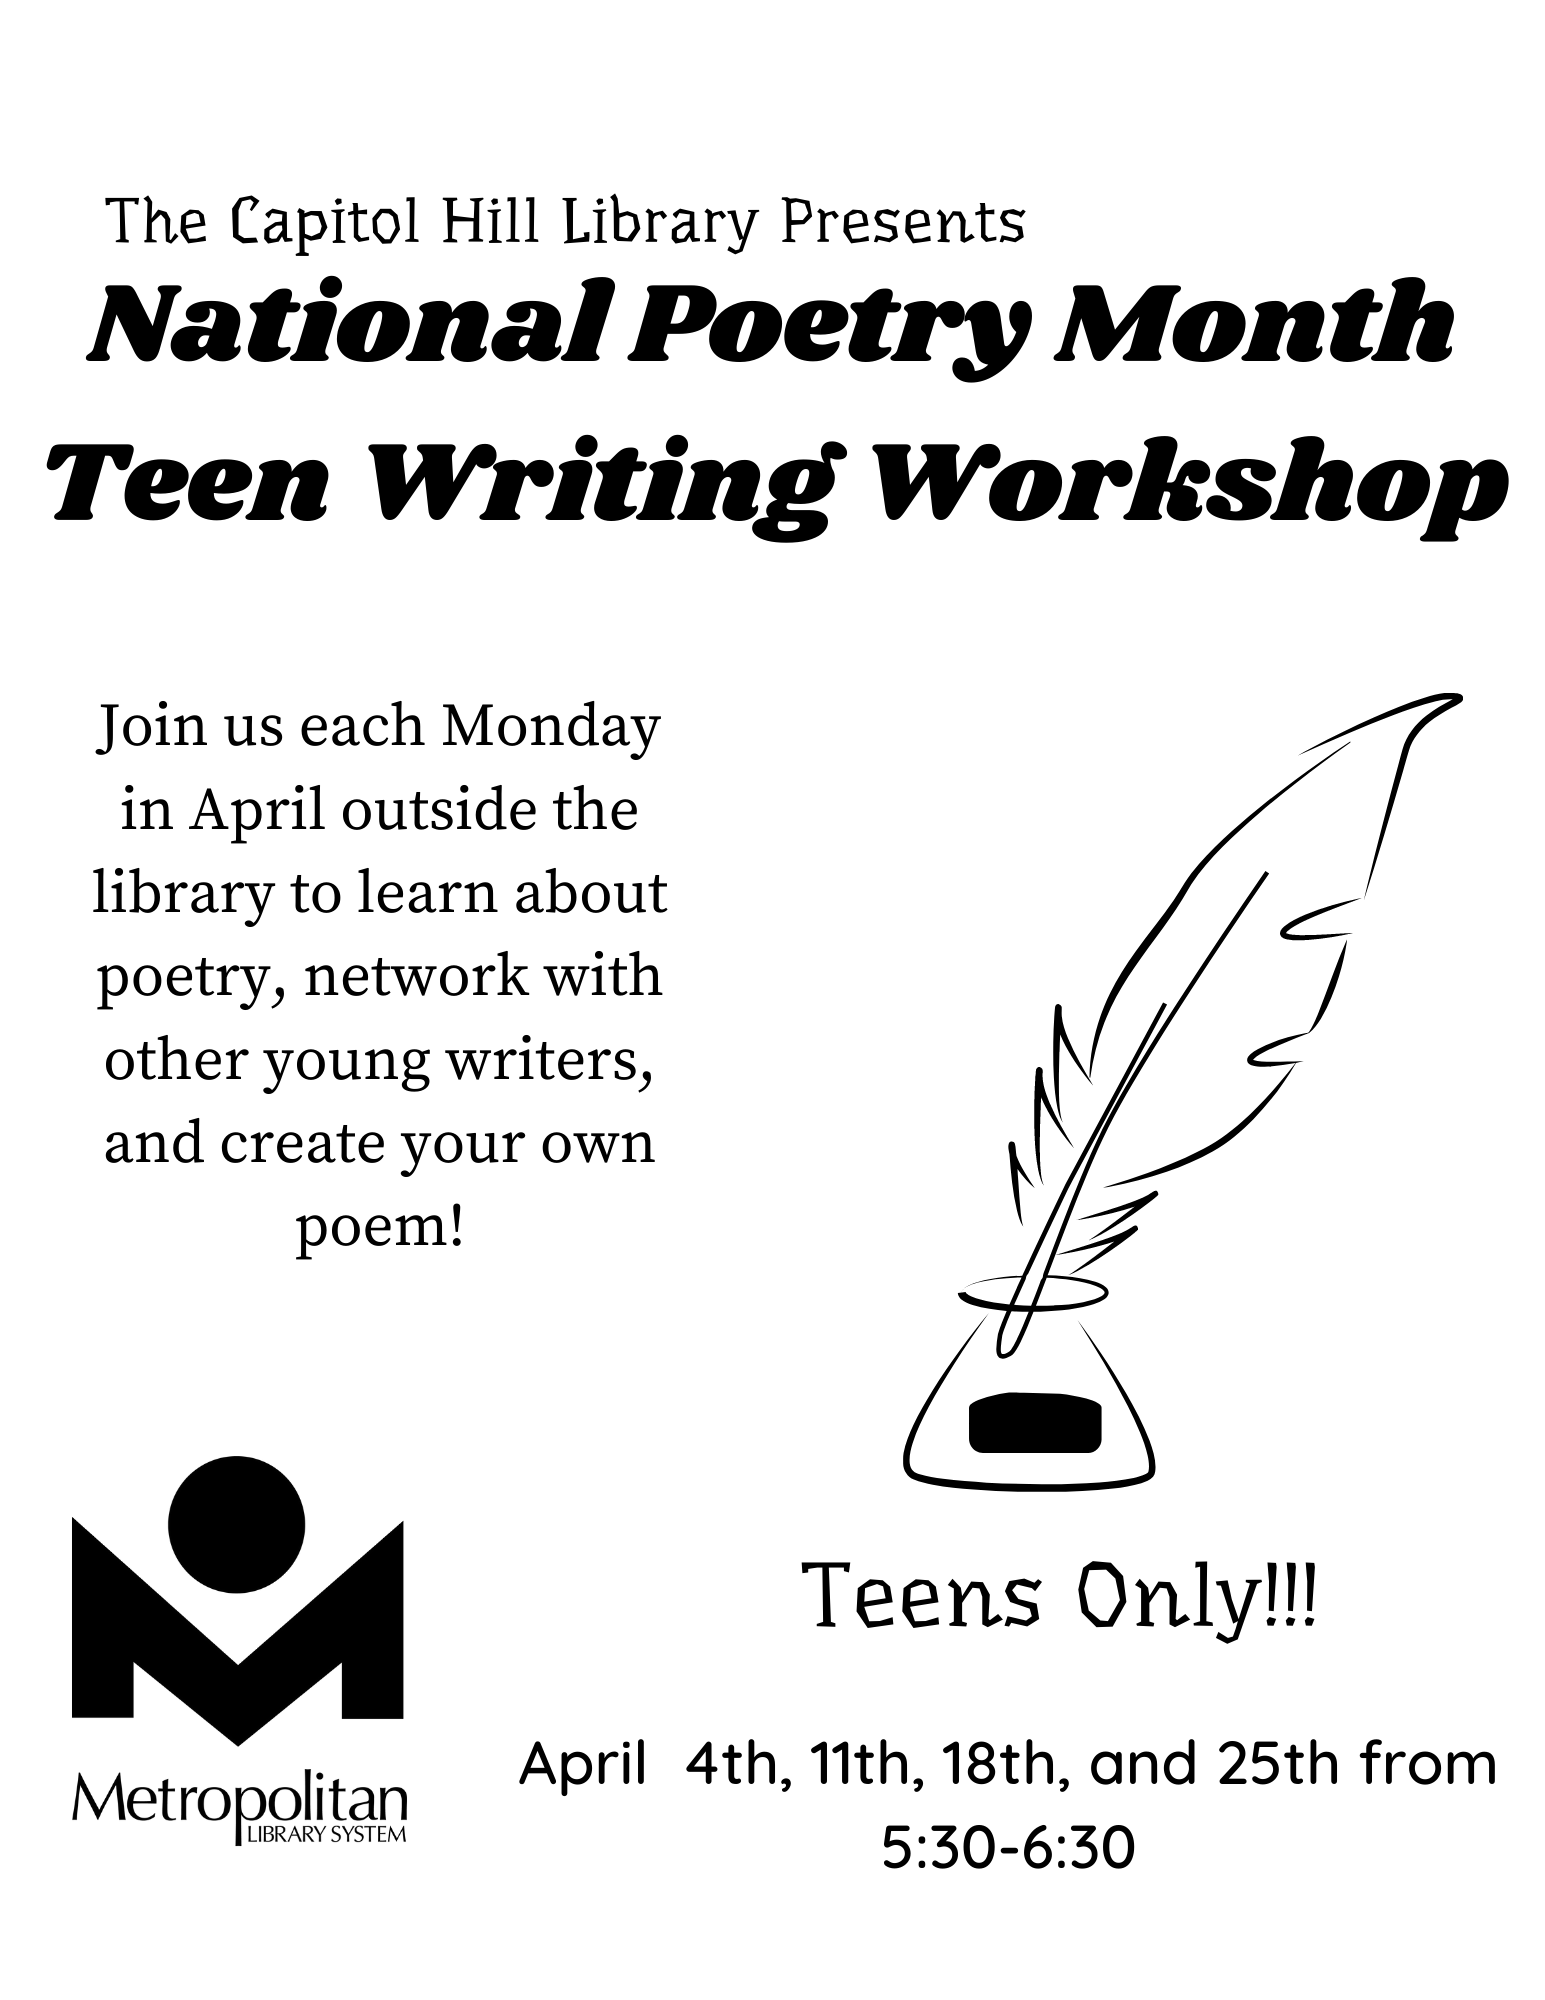 Information about teen poetry workshop on April 4, 11, 18, and 25. Teens only